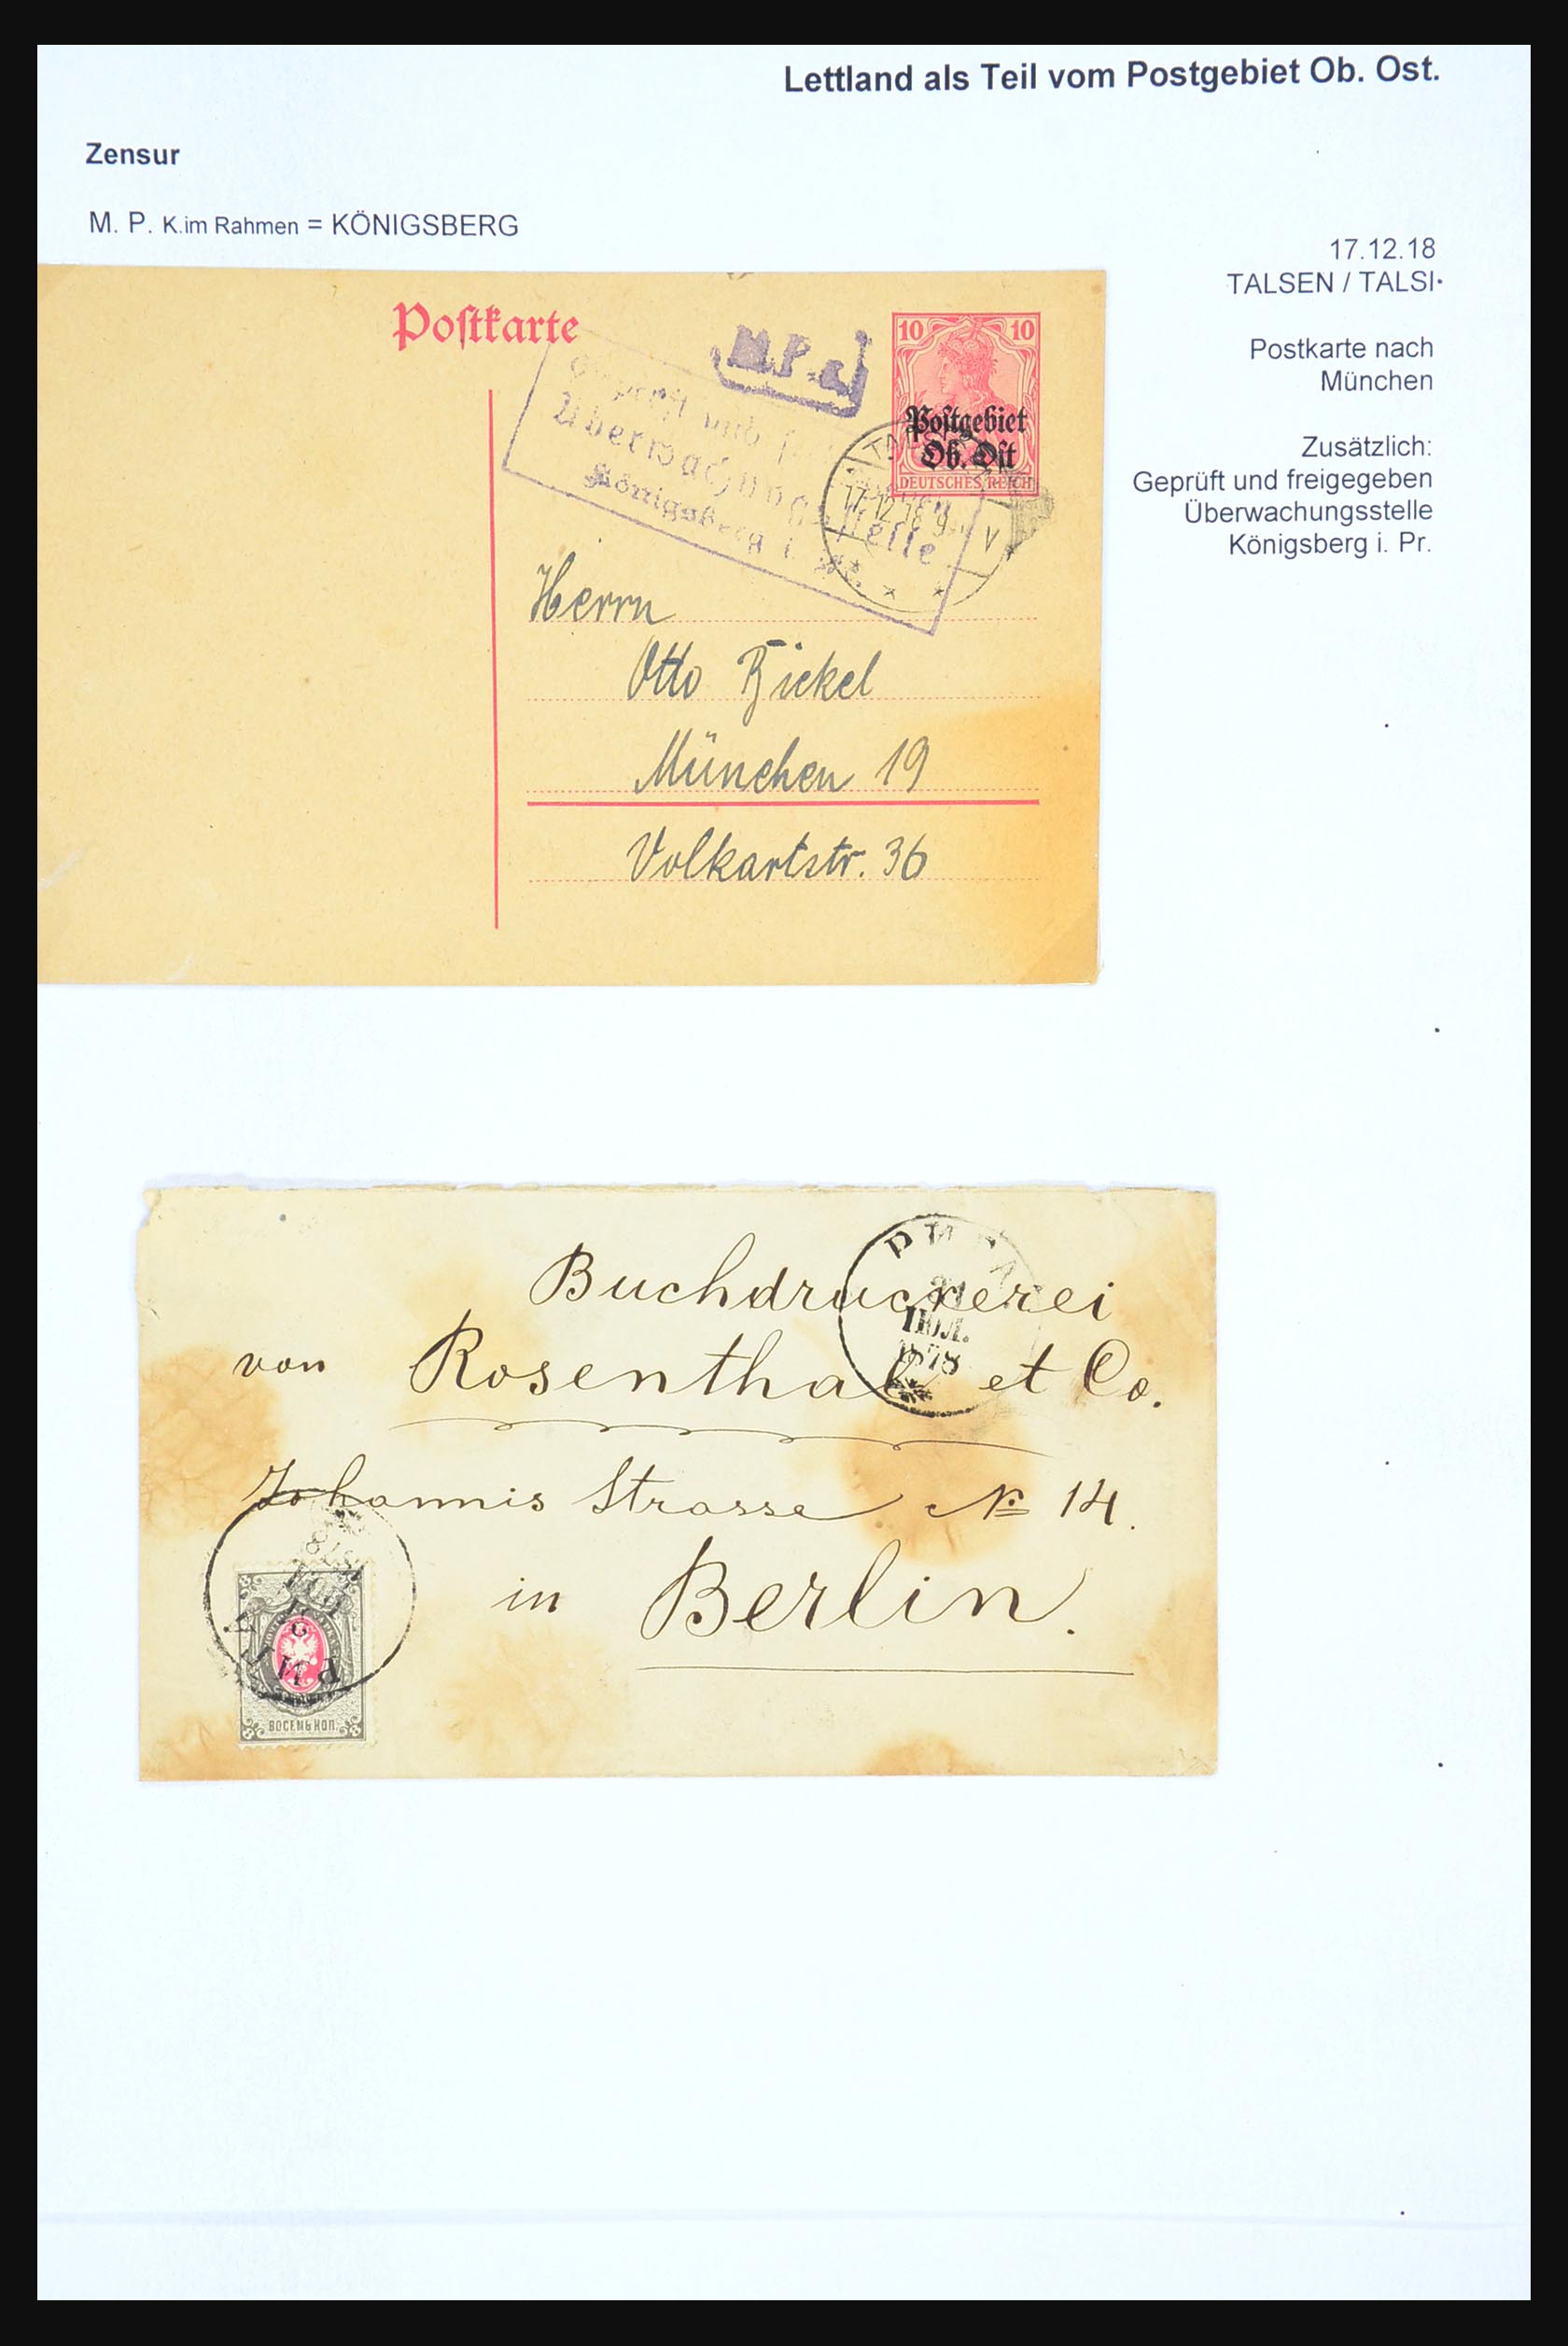 31305 064 - 31305 Latvia as part of Russia 1817-1918.